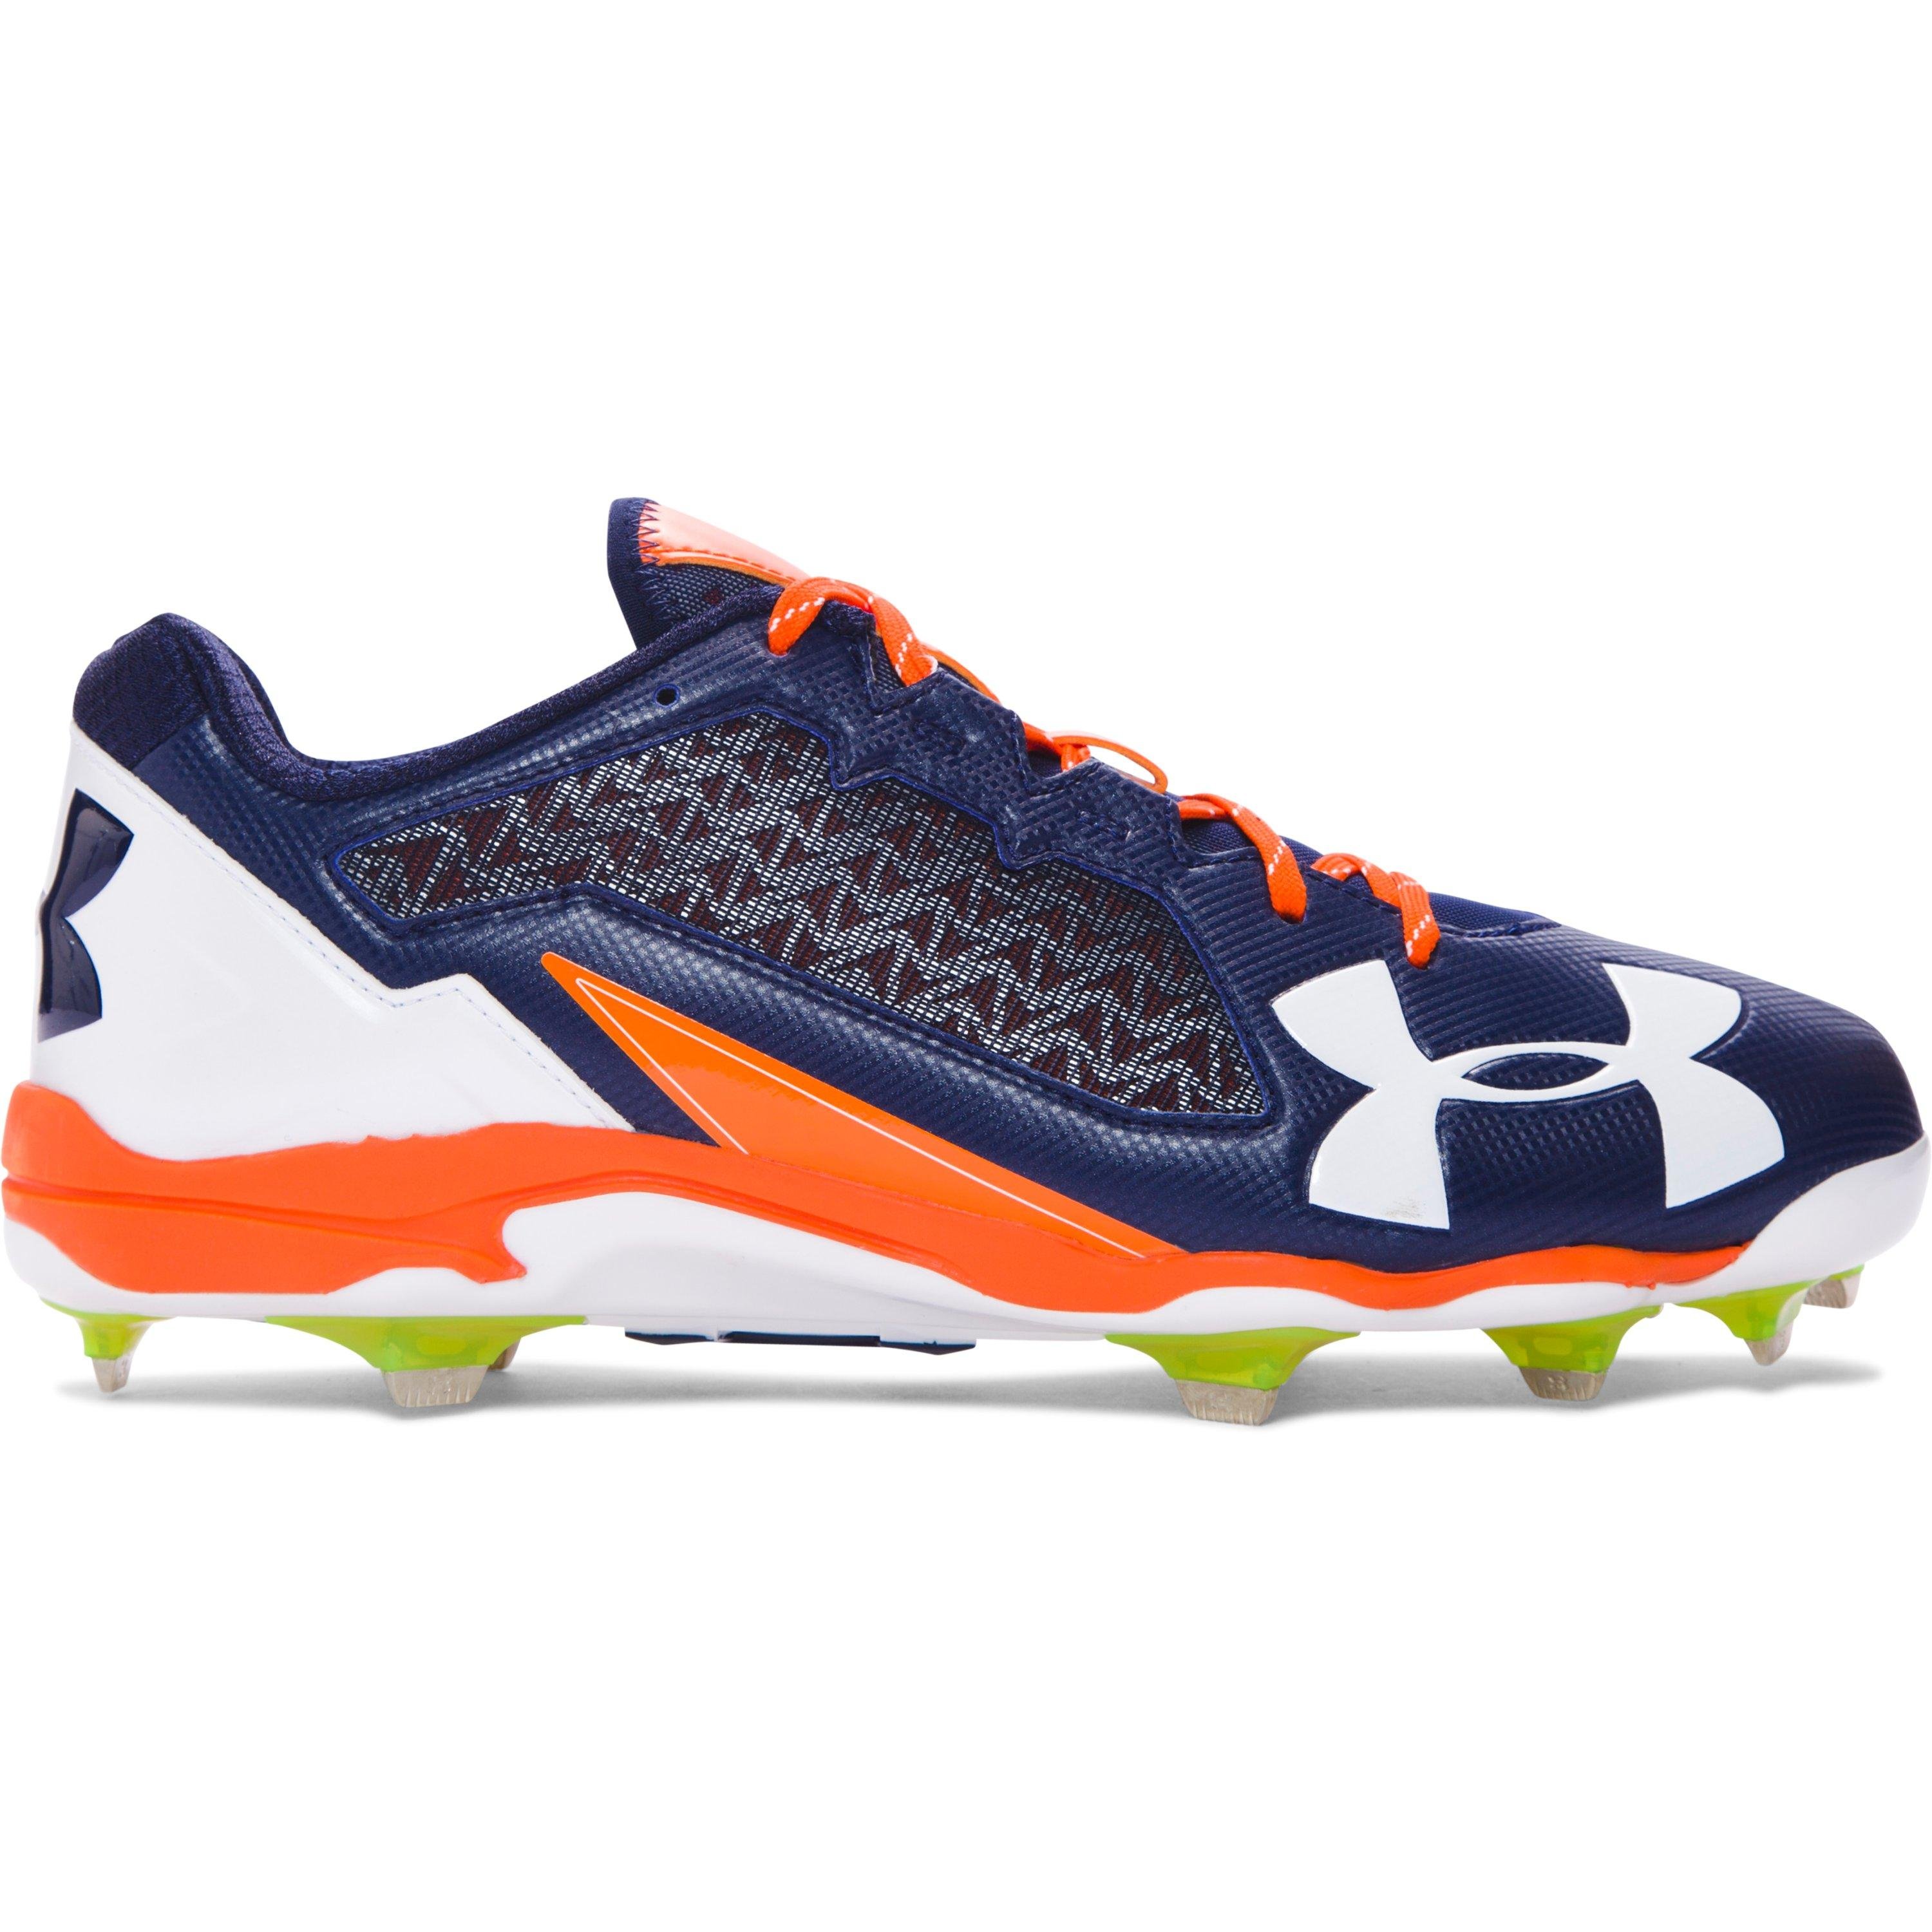 Under Armour Mens Deception Low Diamondtips Baseball Cleat Blue White 15 D 